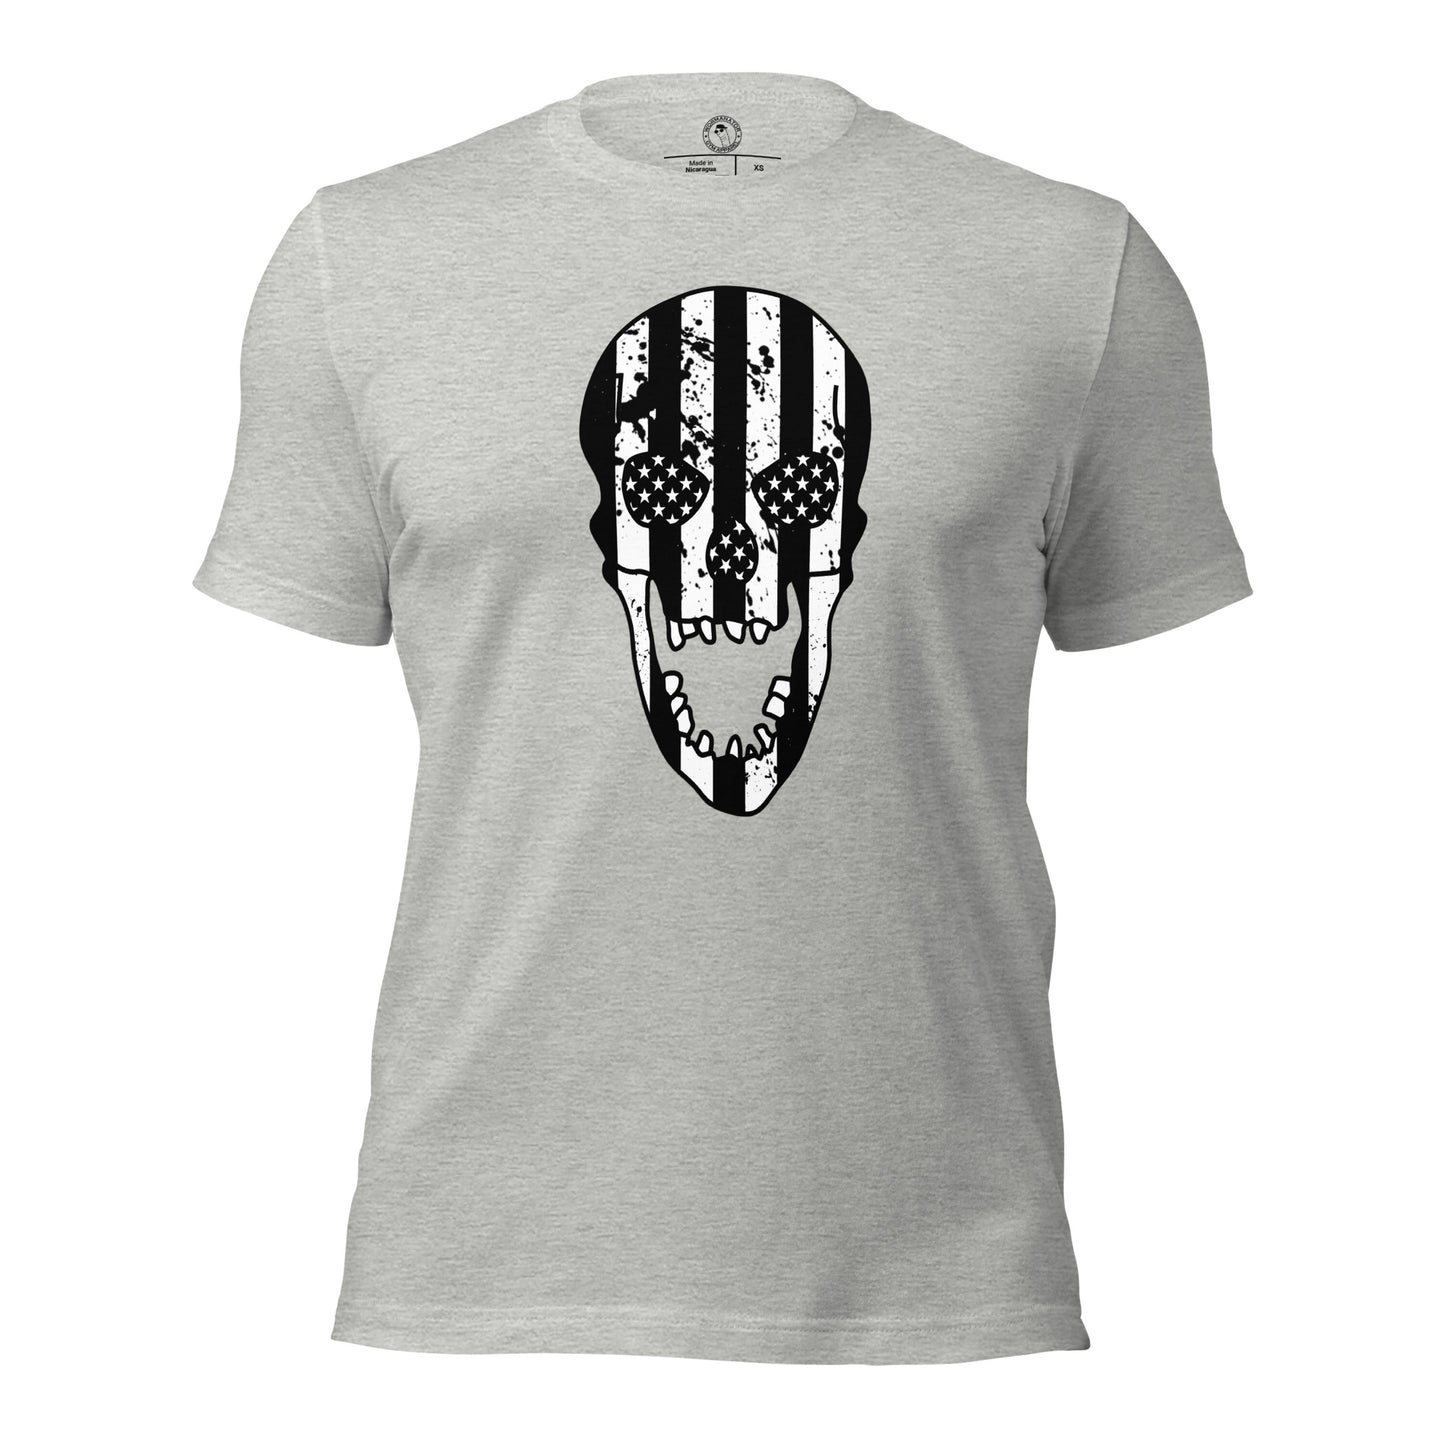 Blacked-Out USA Skull Shirt in Athletic Heather